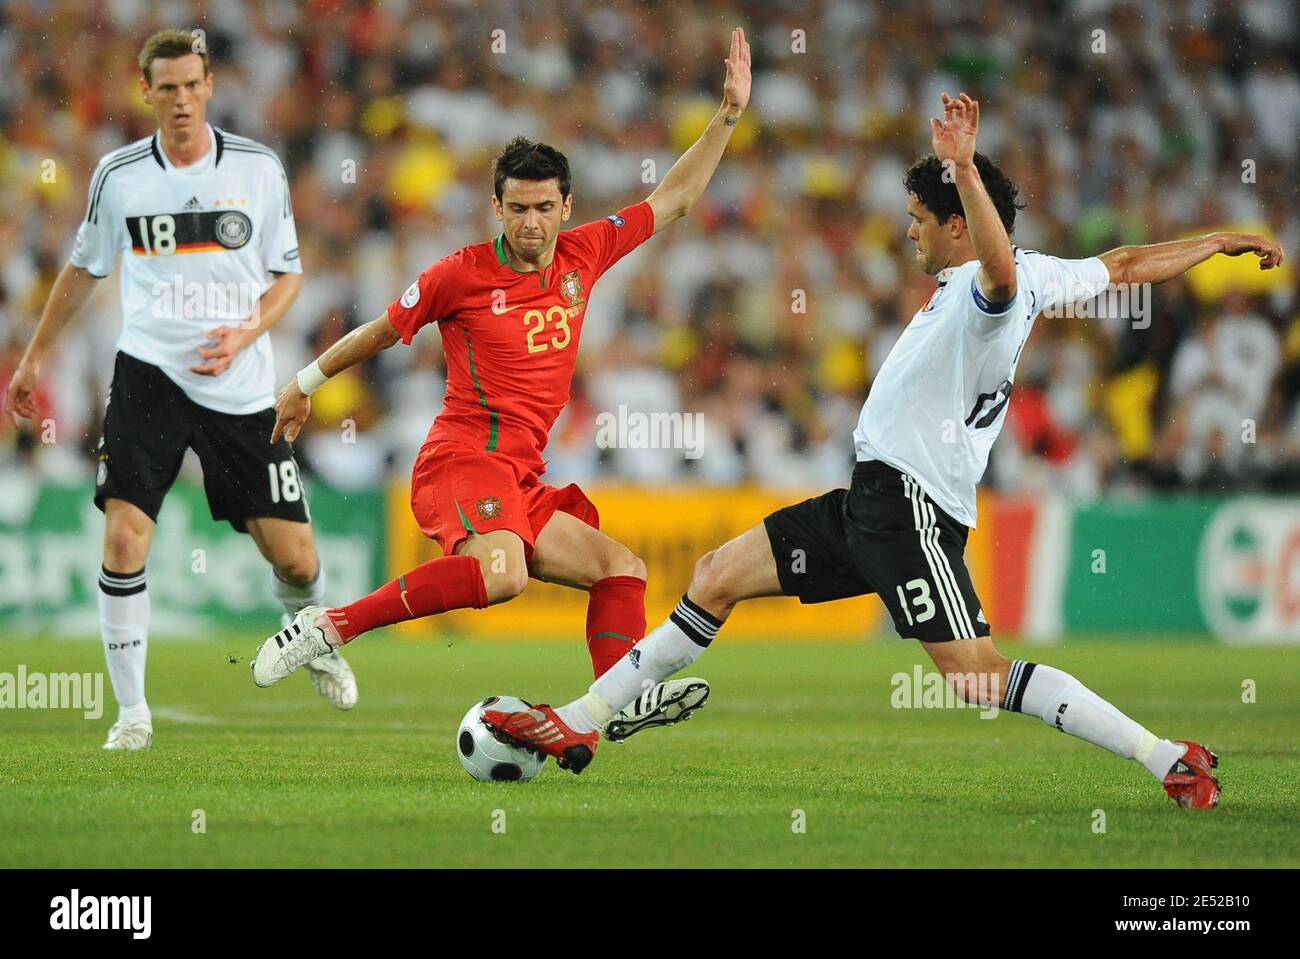 Germany's captain Michael Ballack and Portugal's Helder Postiga battle for the ball during the Euro 2008, UEFA European Championship quarter final match, Portugal vs Germany at the St. Jakob-Park stadium in Basel, Switzerland on June 19, 2008. Germany won 3-2. Photo by Steeve McMay/Cameleon/ABACAPRESS.COM Stock Photo